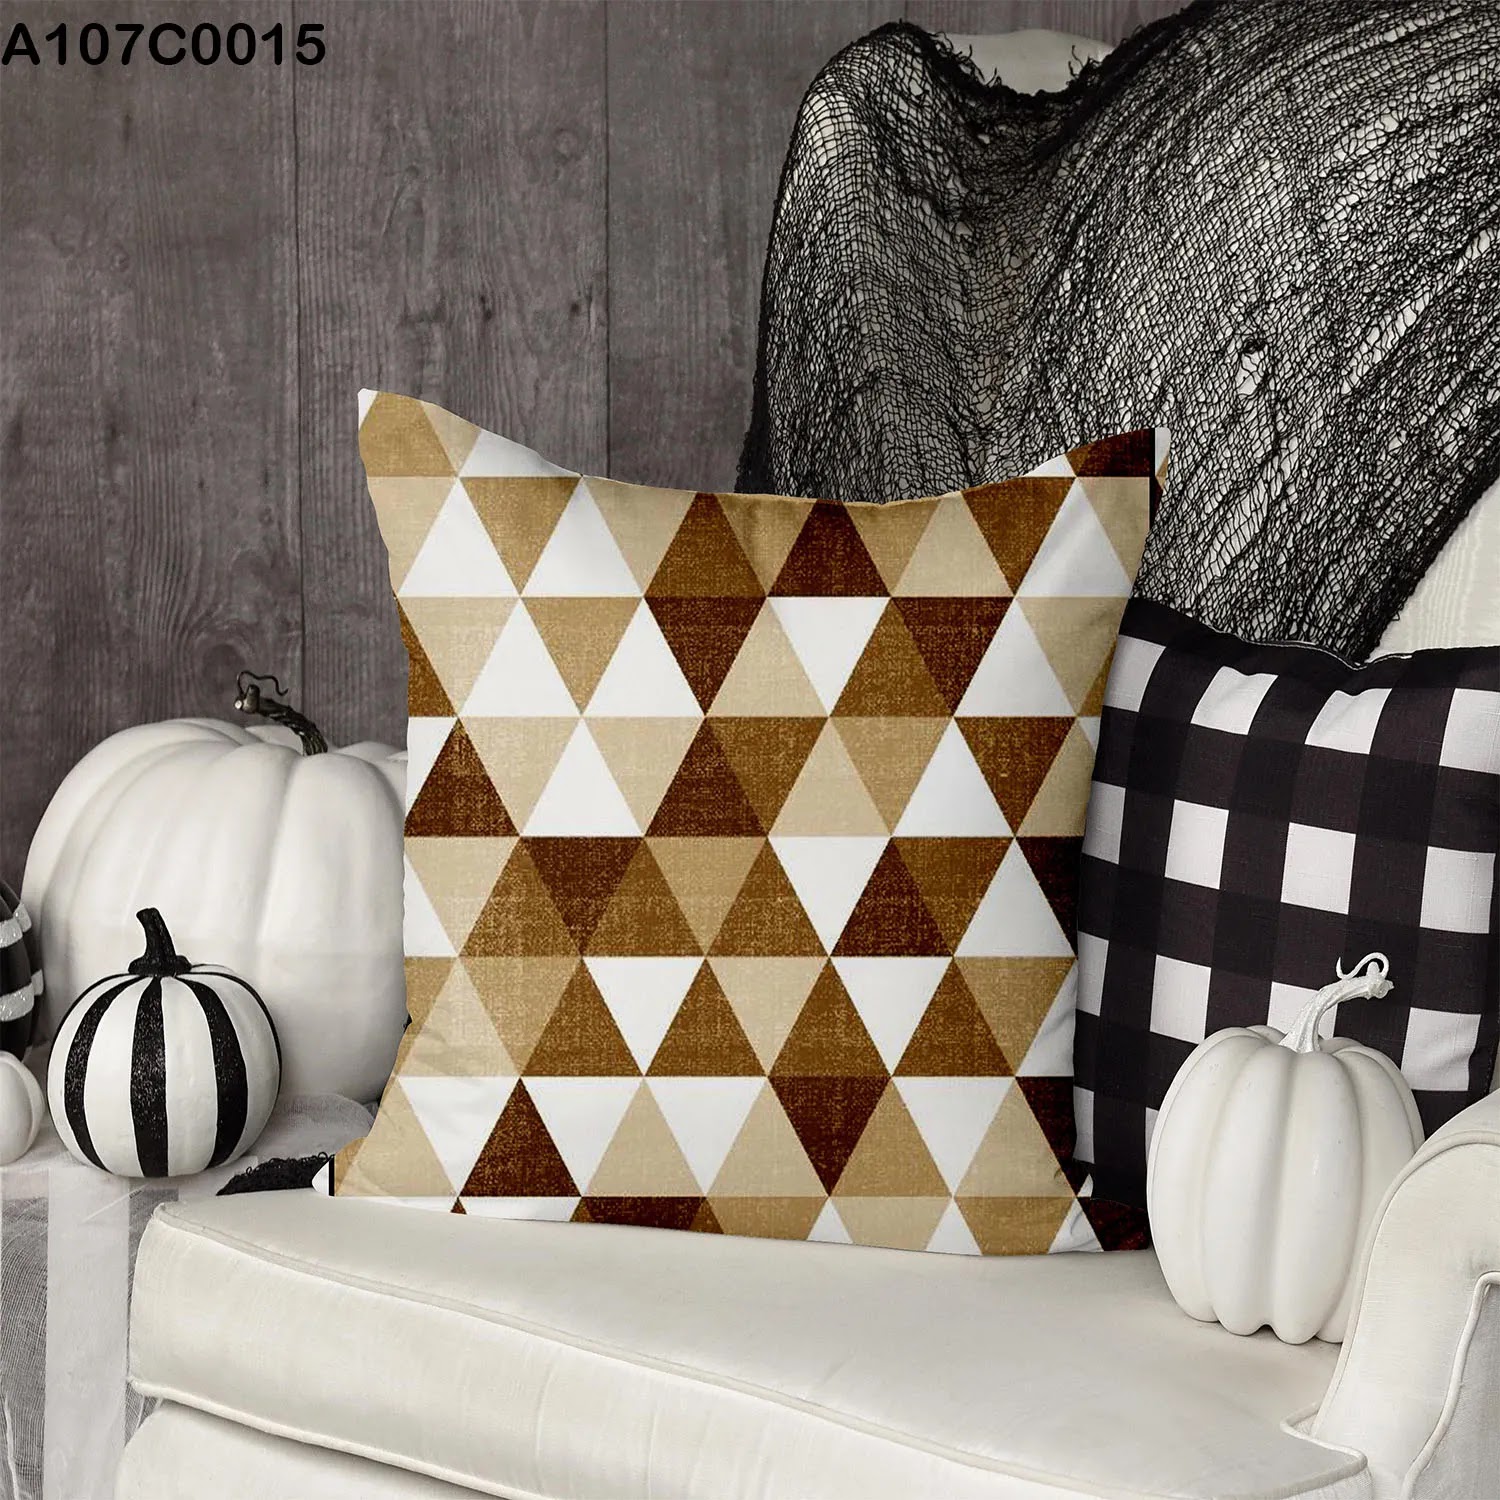 Pillow case with small triangles in Brown & white gradations